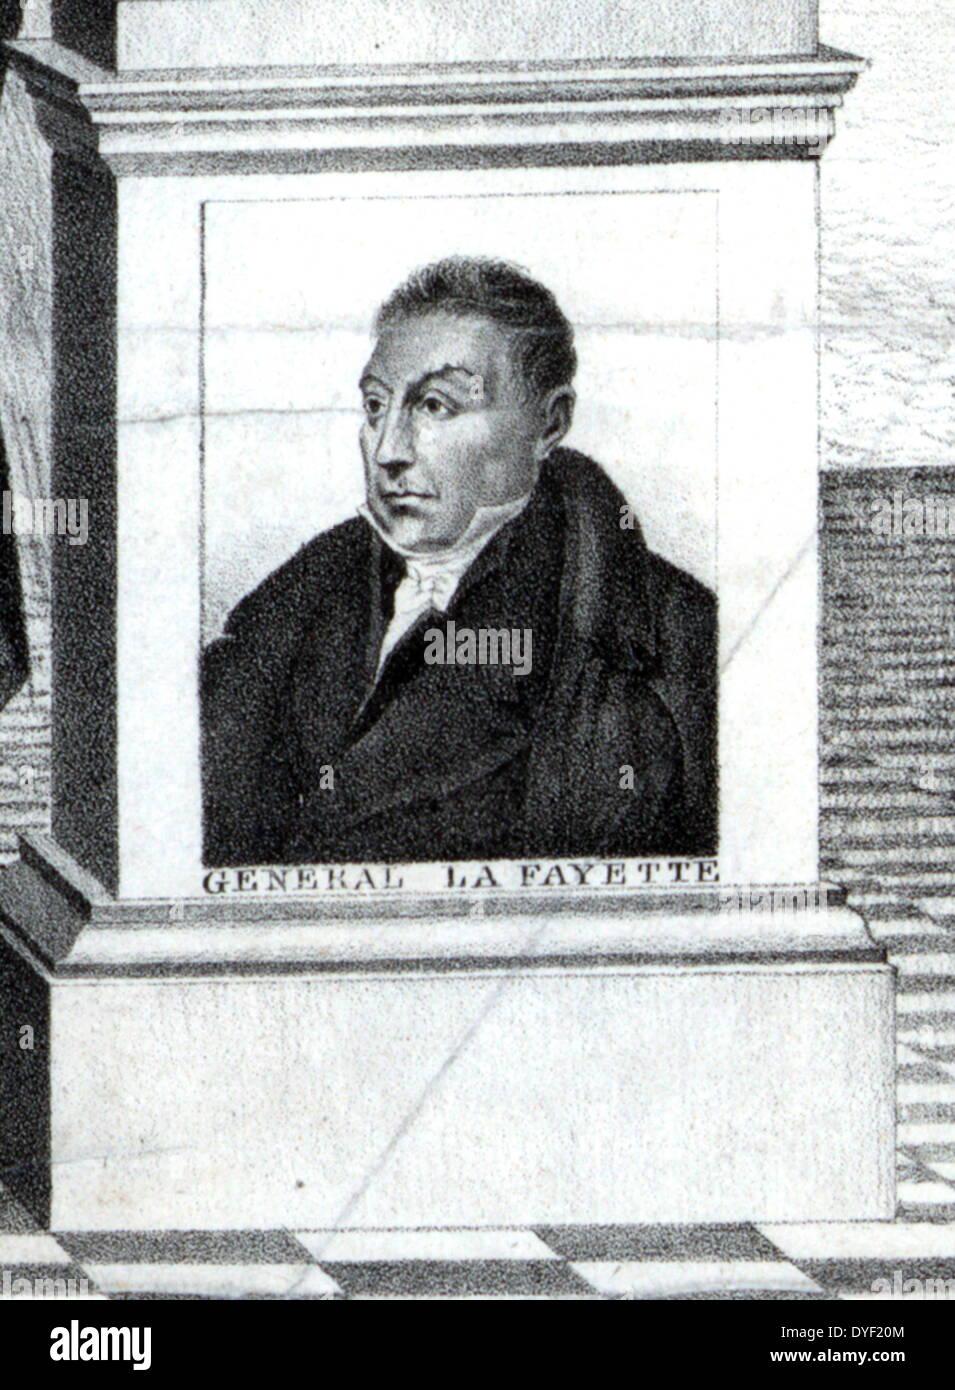 Caricature portrait of General La Fayette contained within a political illustration from the 1800's called 'Independence declared 1776 - The union must be preserved'. Detail on the base of a column in the illustration. Companion piece to a portrait of General Warren (contained within the same overall illustration.) Stock Photo